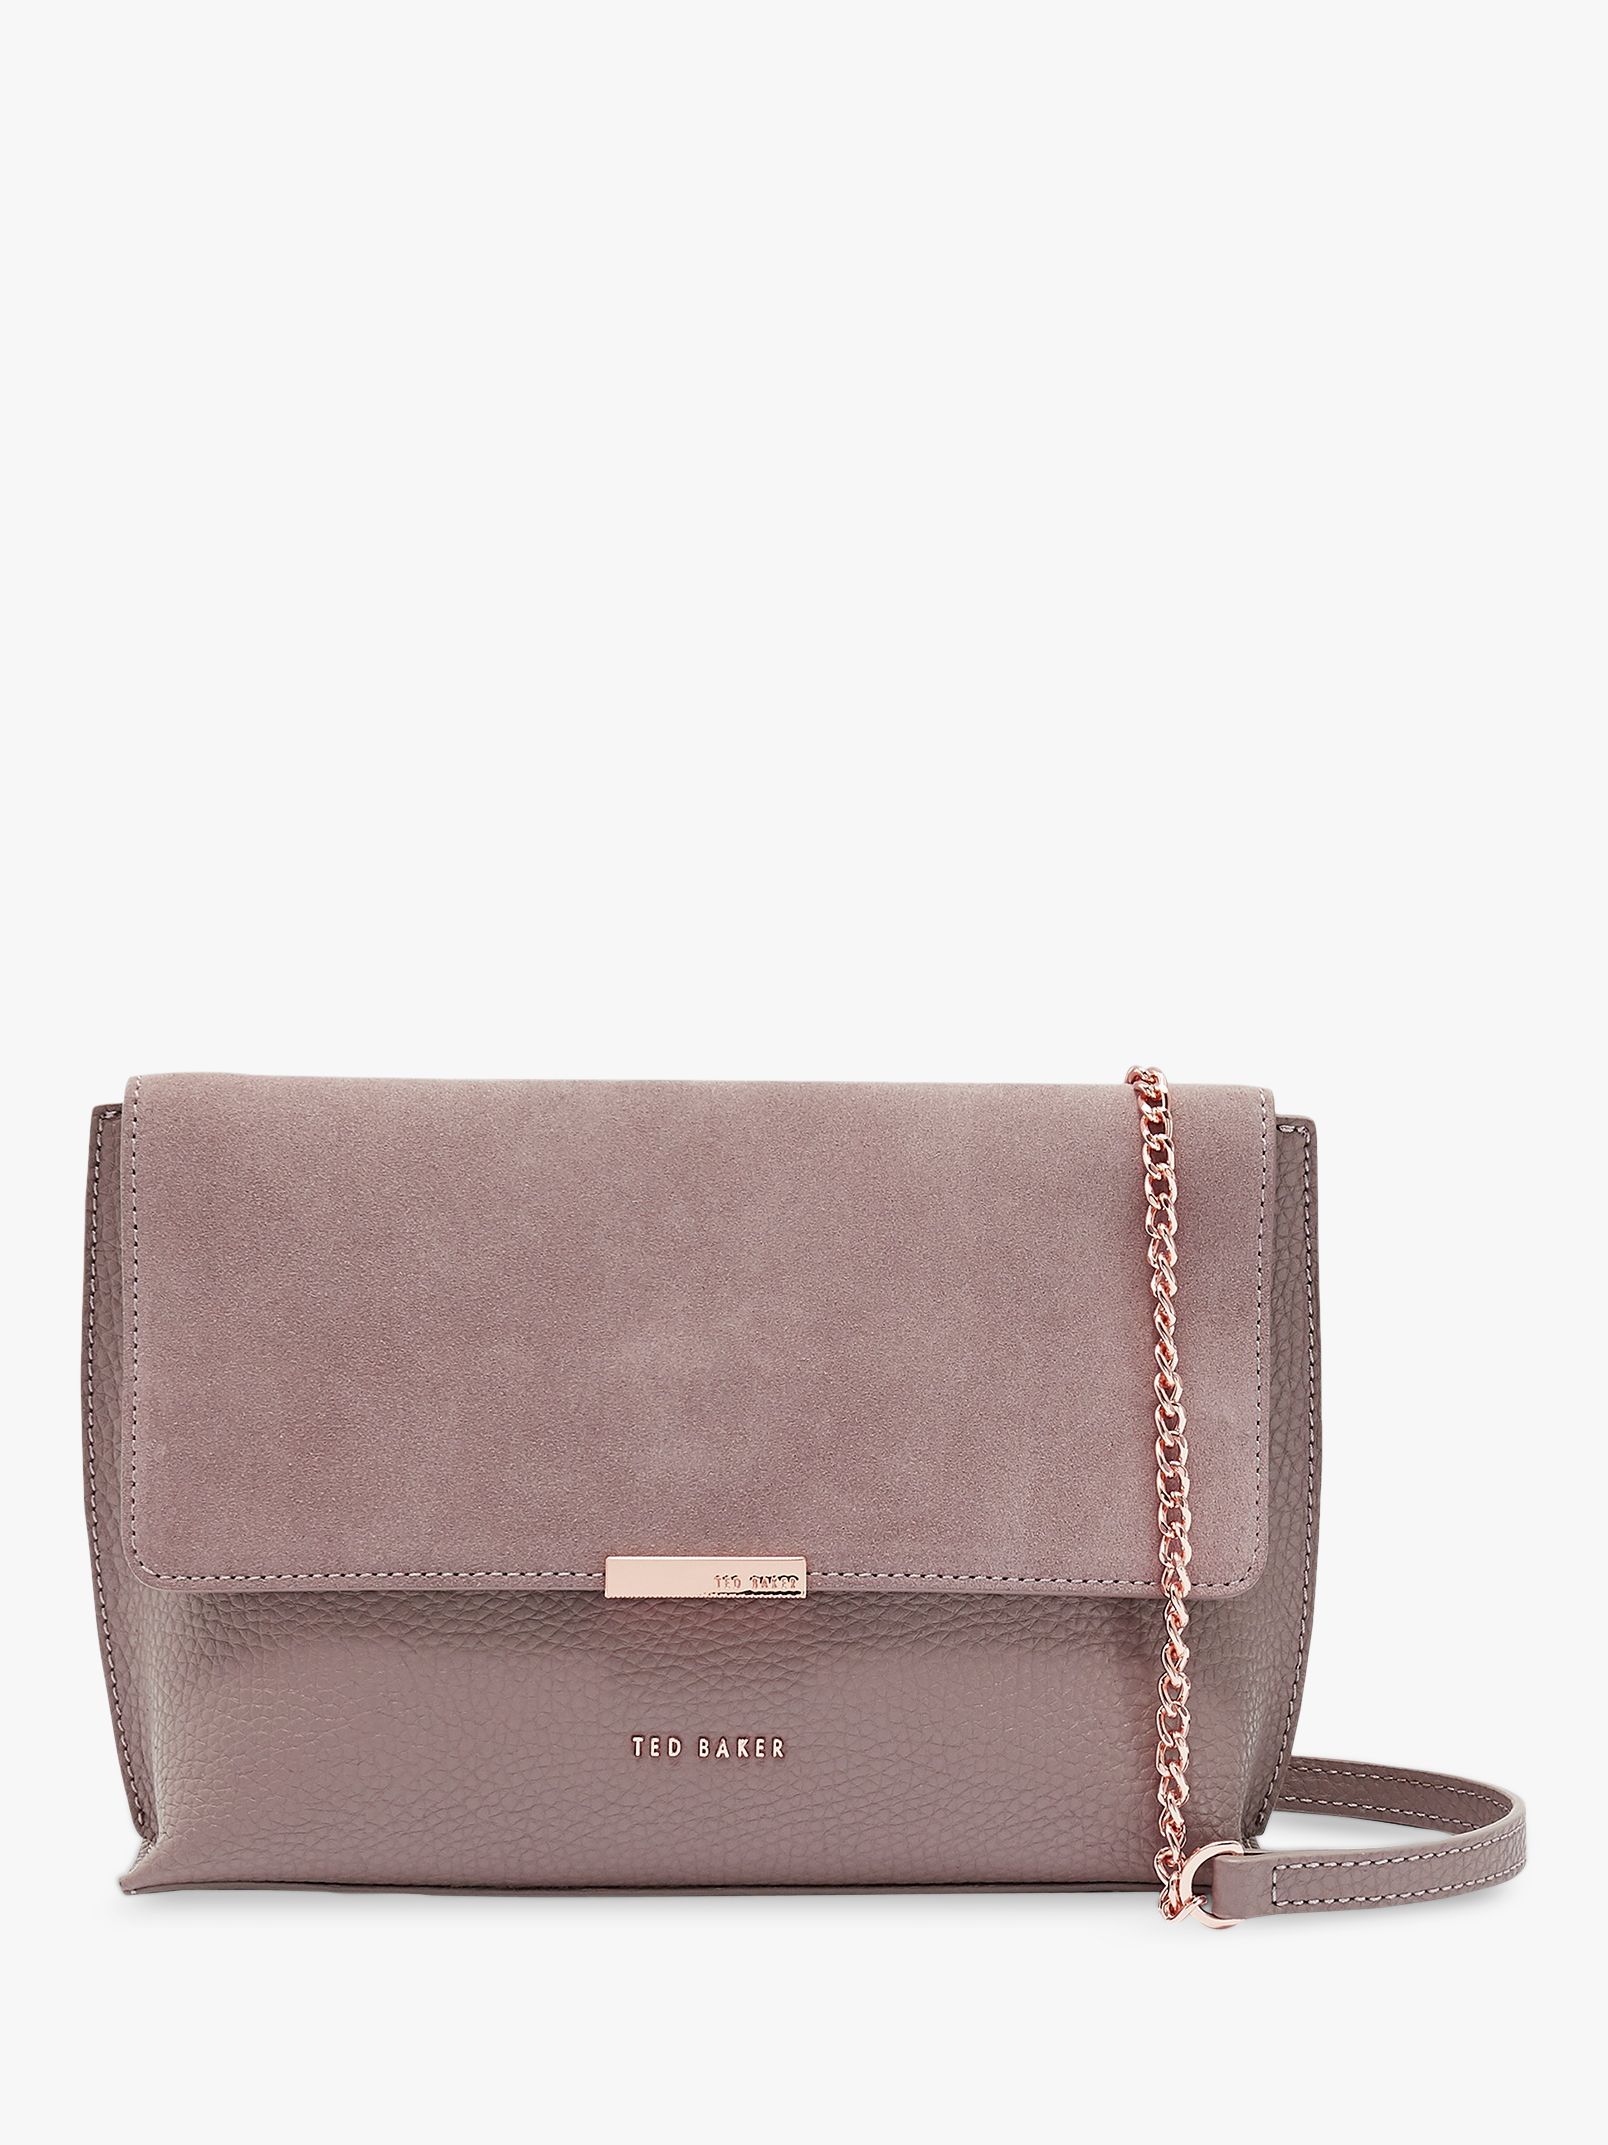 ted baker clutch sale